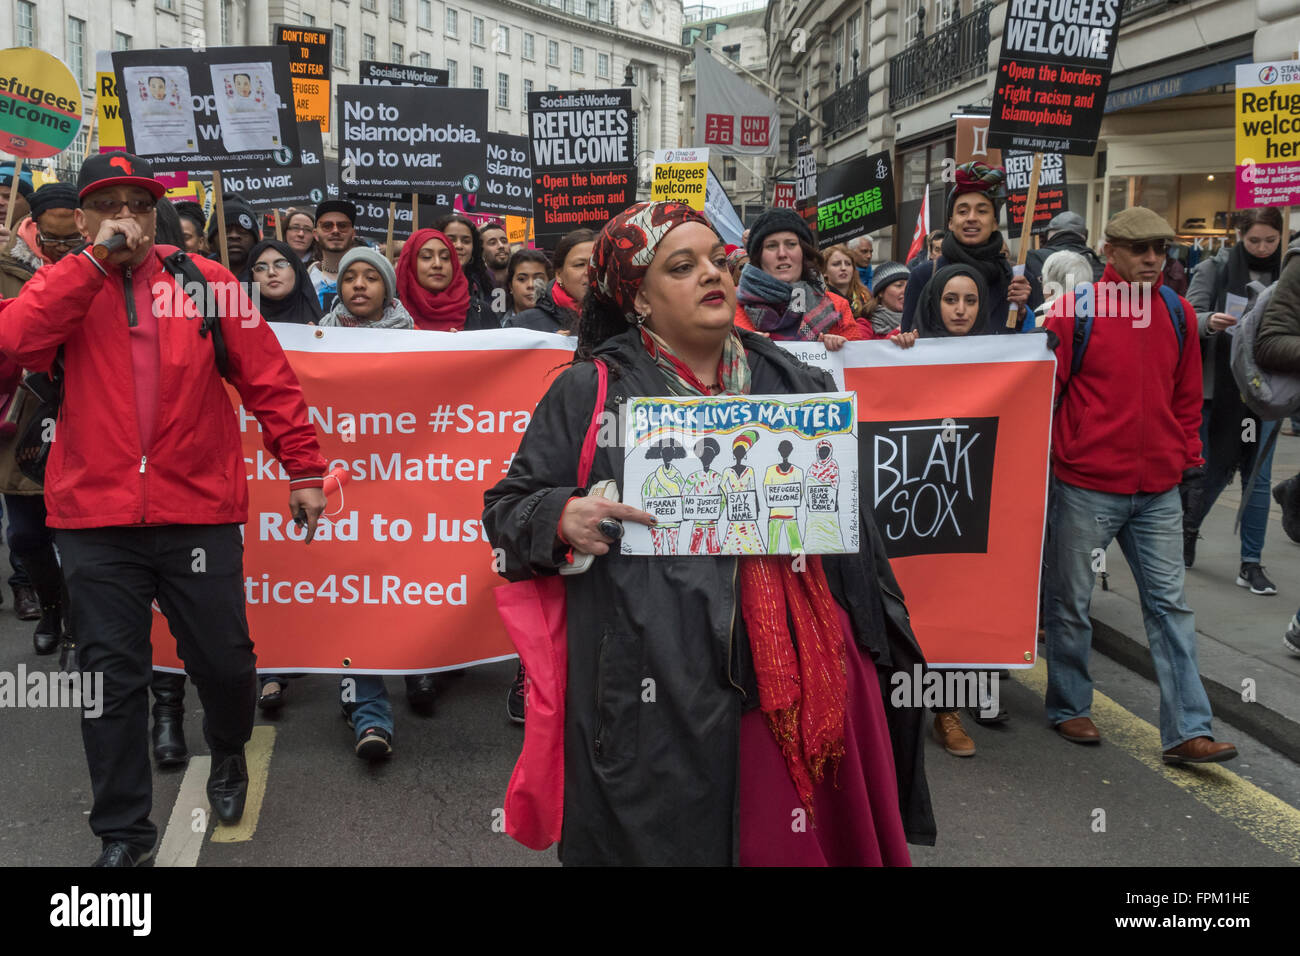 London, UK. Saturday 19th March 2016. Zita Holbourne and Lee Jasper (left) walk in front of the BlakSox banner and the 'Black Lives Matter' Bloc as thousands march through London from the BBC in a national demonstration organised by Stand Up to Racism against racism, Islamophobia, anti-Semitism and fascism and to say clearly that refugees are welcome here. Peter Marshall/Alamy Live News Stock Photo